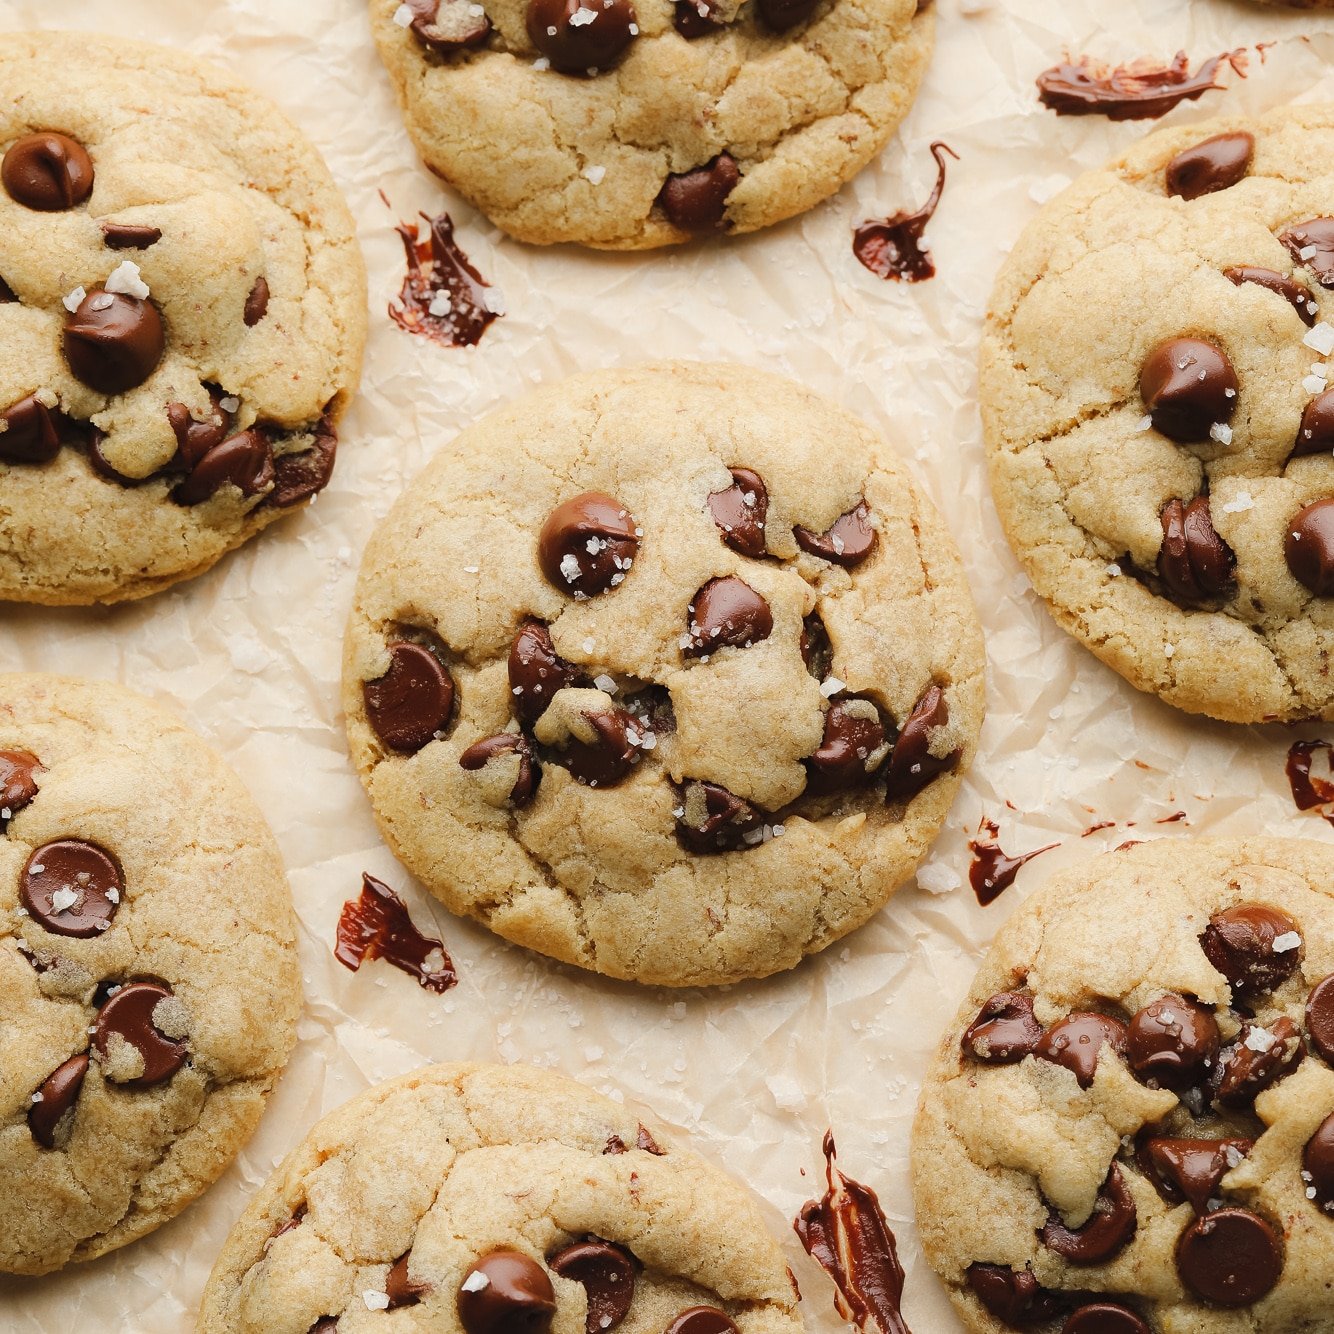 Katie Couric: The Vegan Martha Stewart and Proof in These Chocolate Chip Cookies